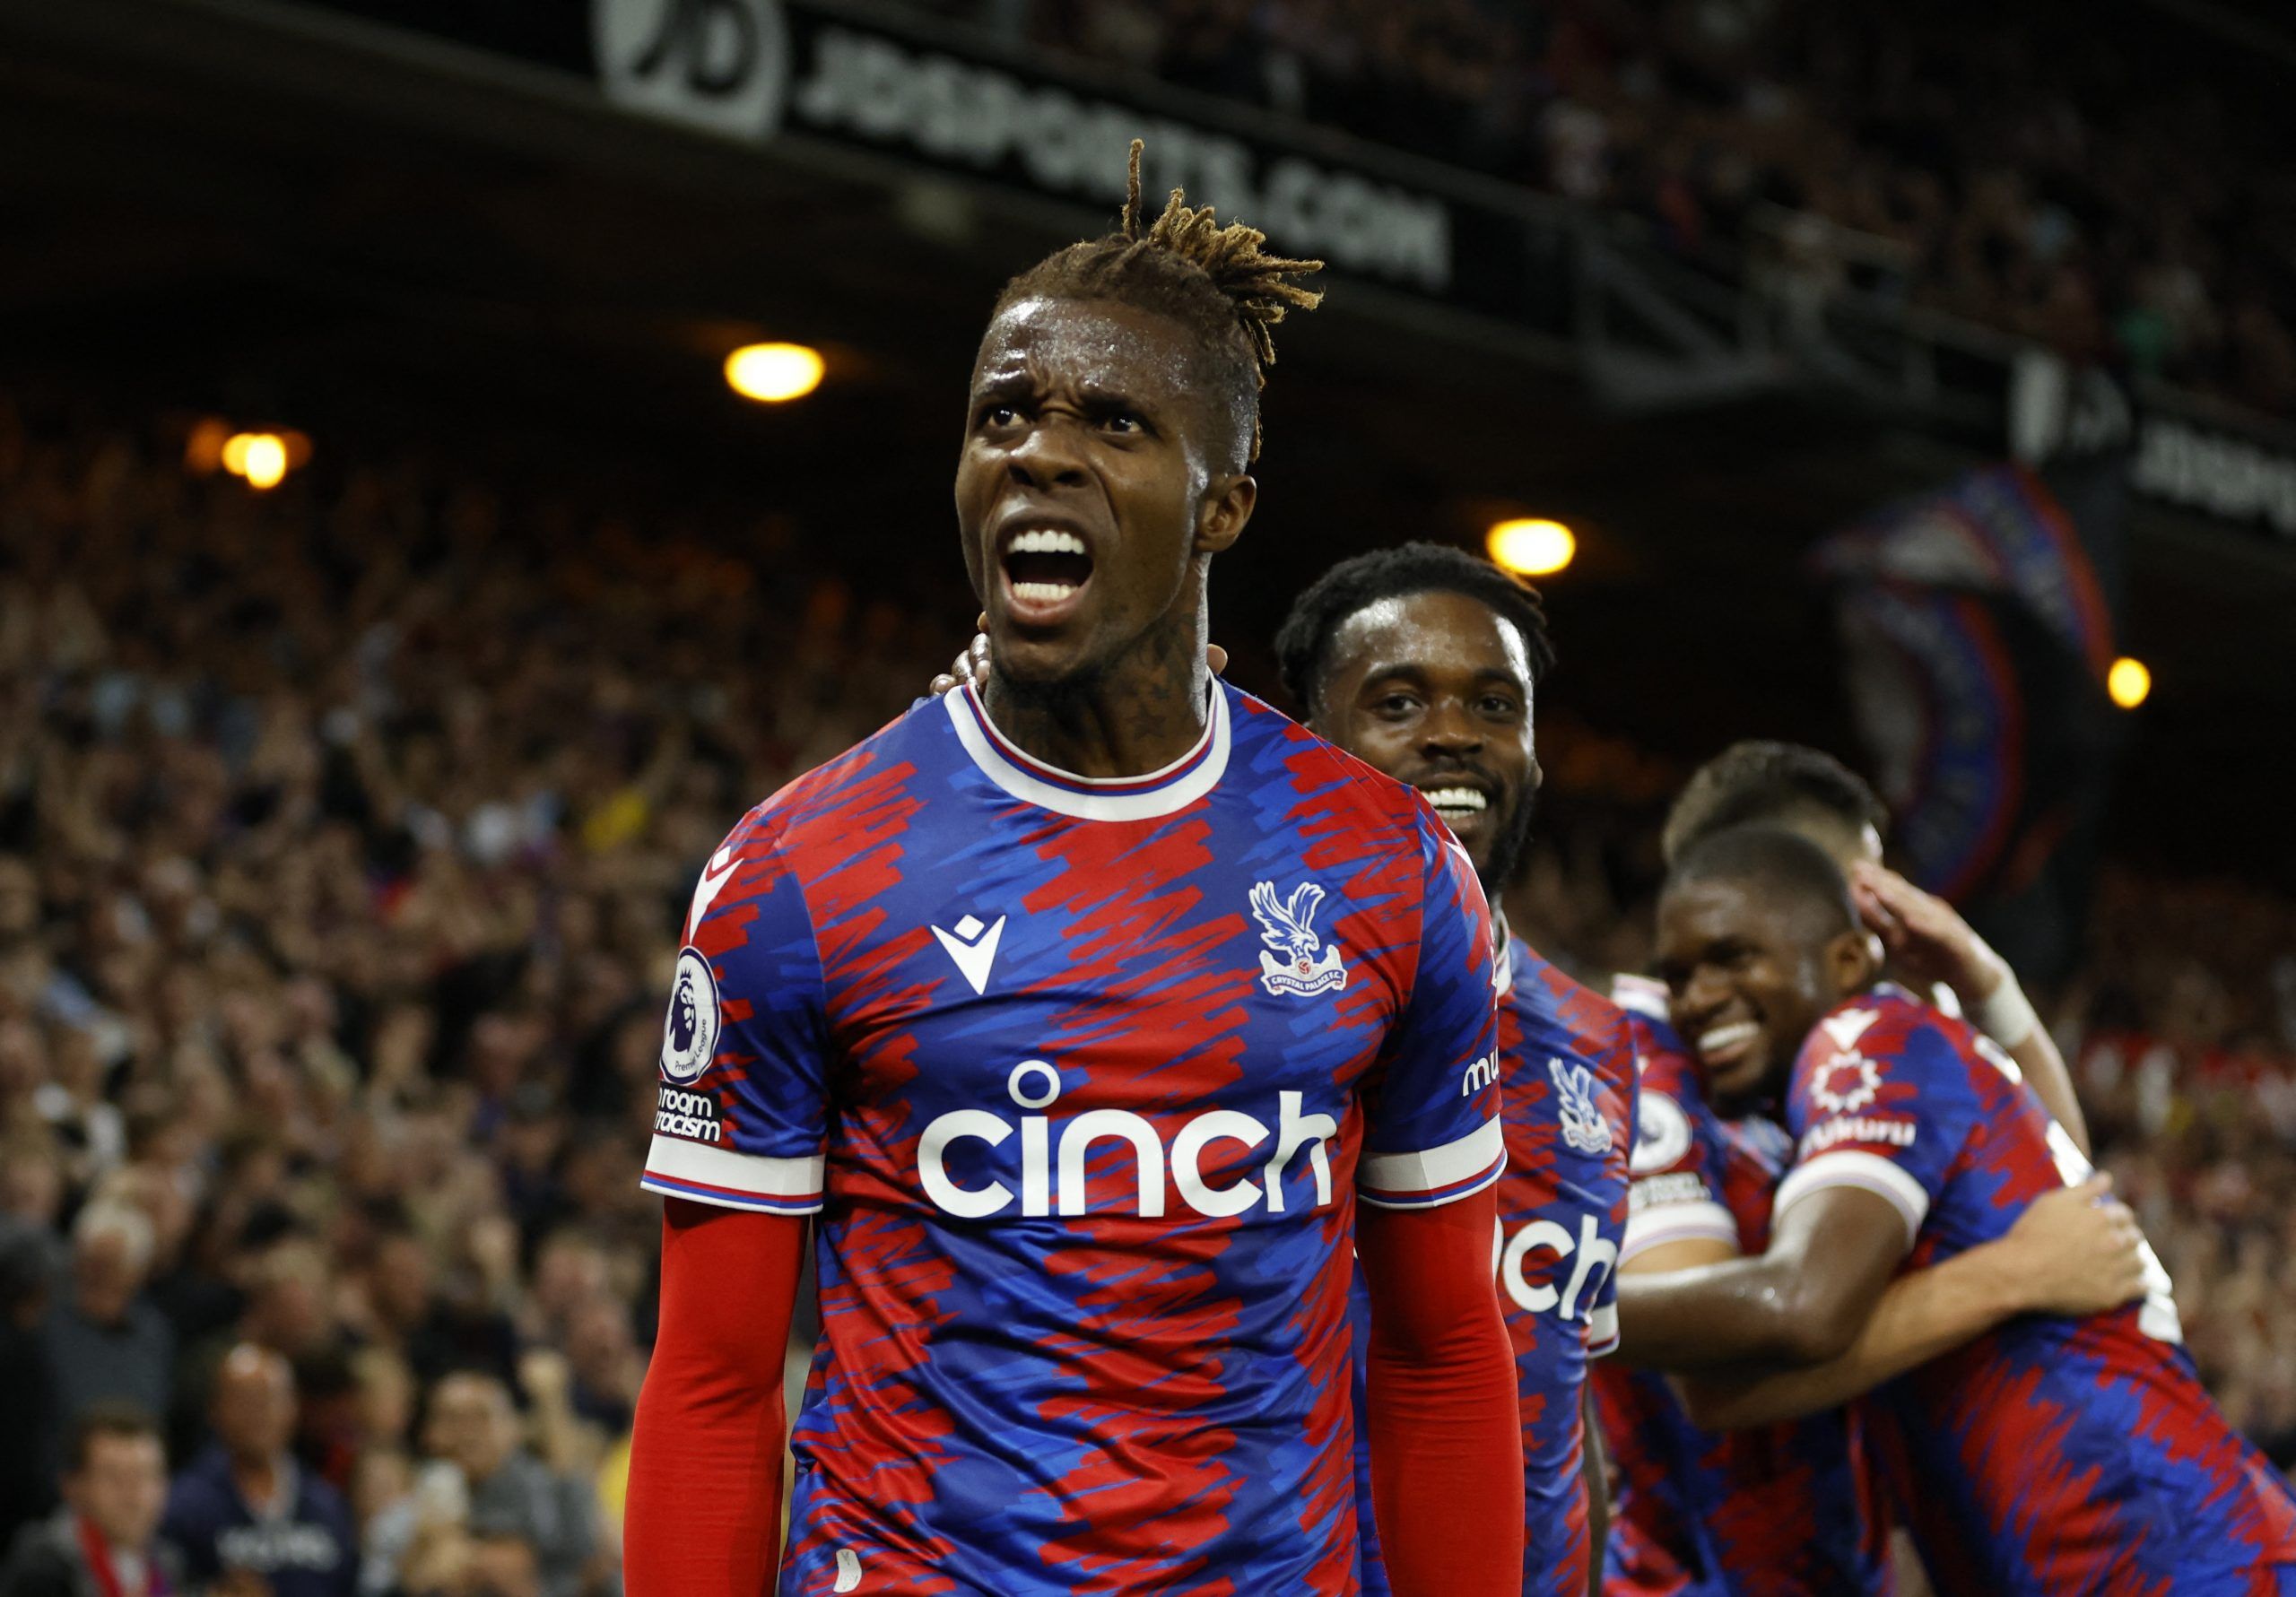 Premier League, Crystal Palace, Wilfried Zaha, Crystal Palace news, Crystal Palace update, Palace news, Palace opinion, CPFC news, Scott Banks, Vieira, CPFC Update